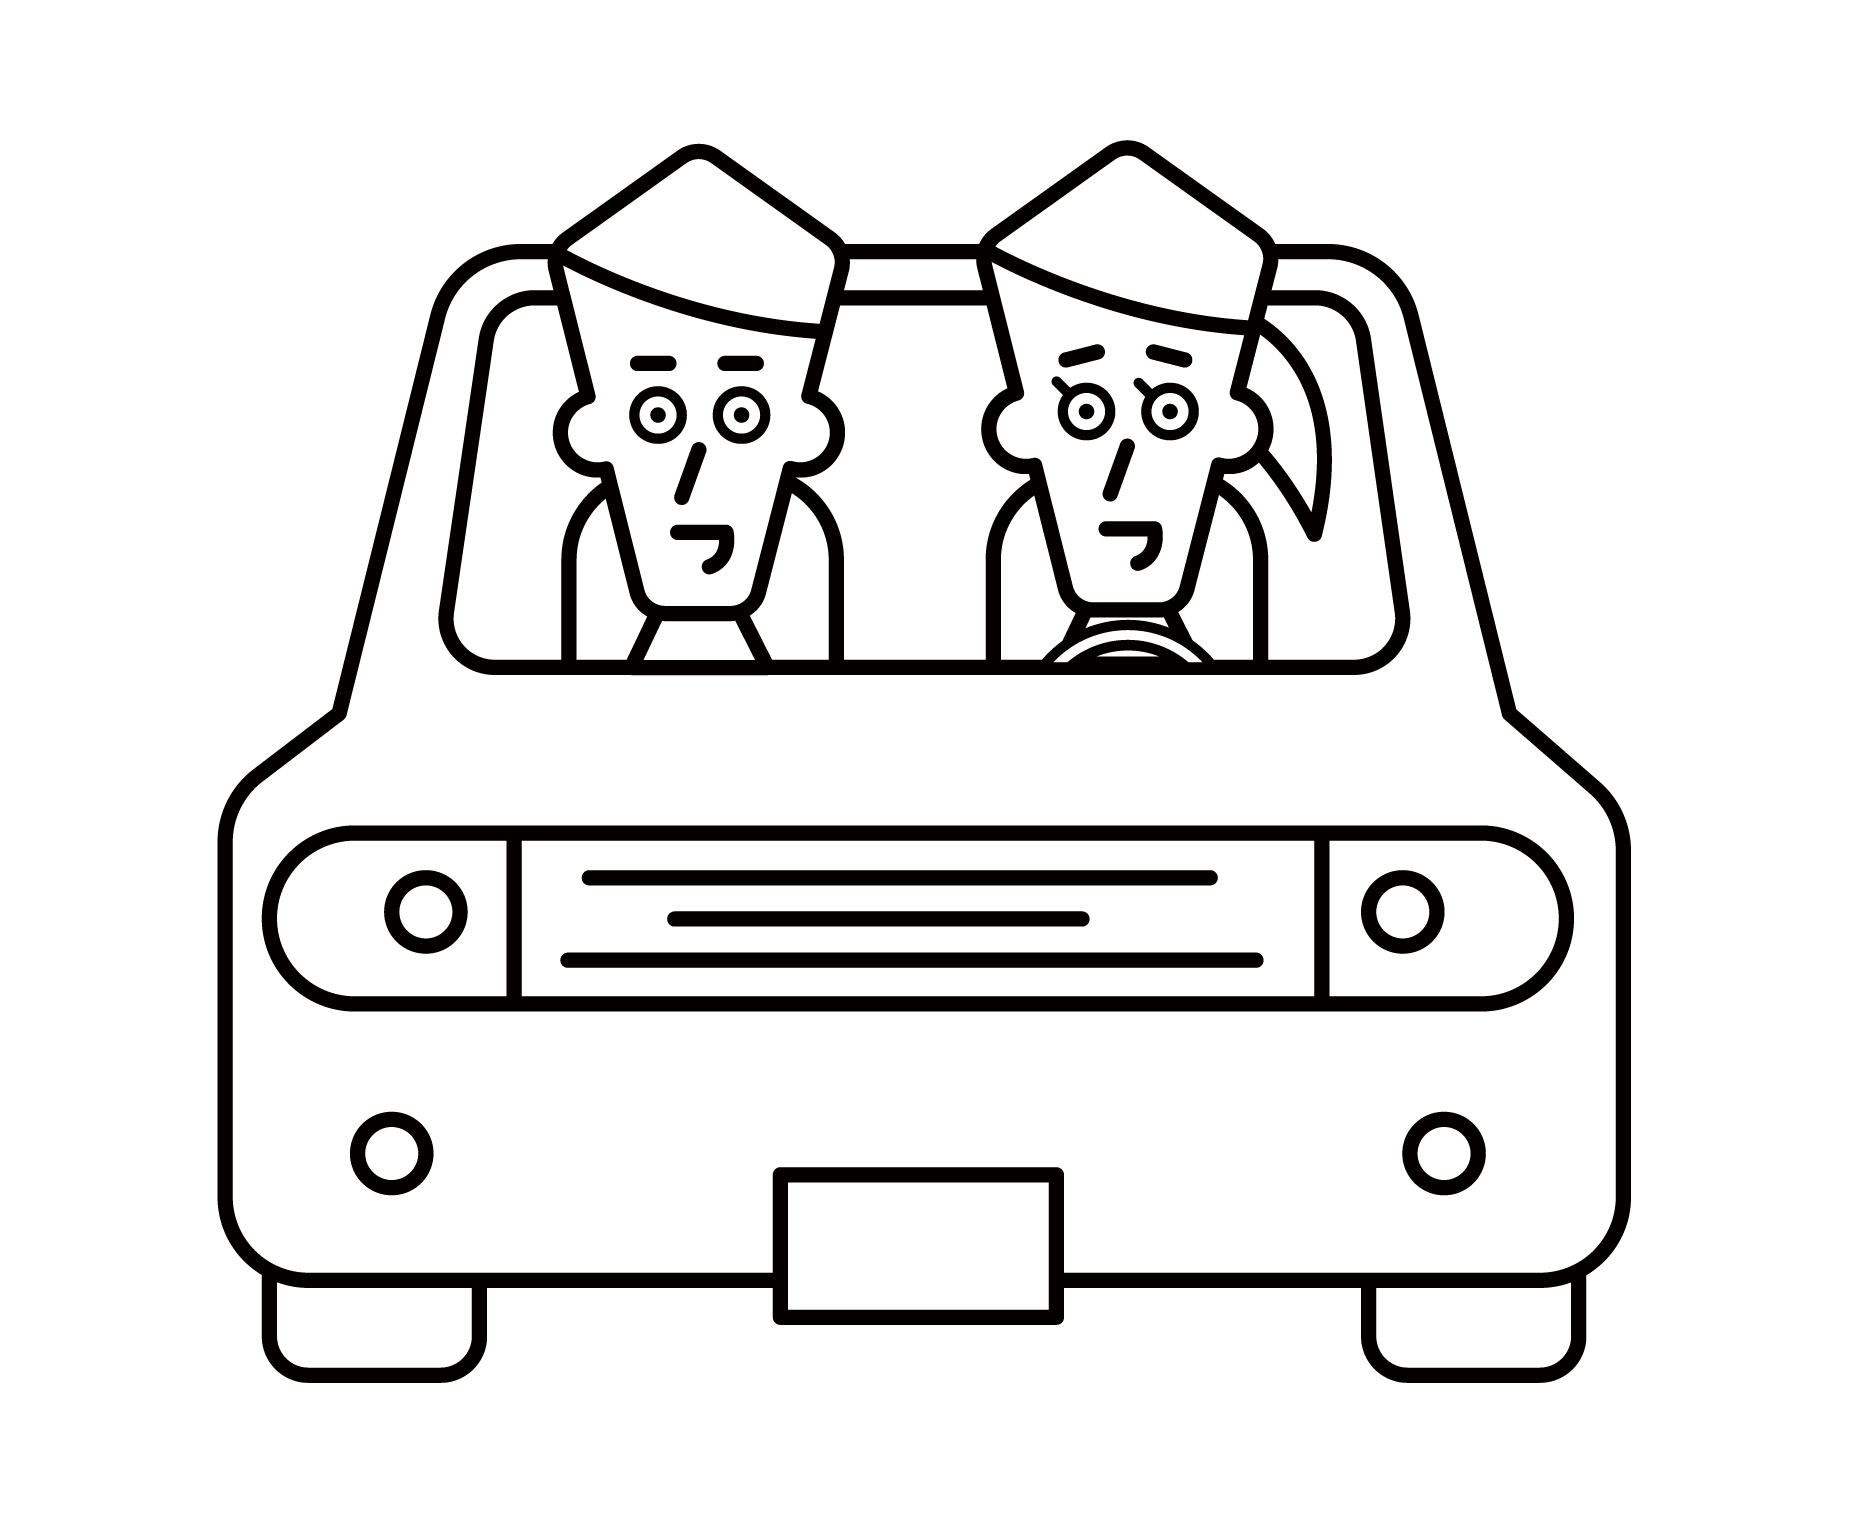 Illustration of a couple riding a car